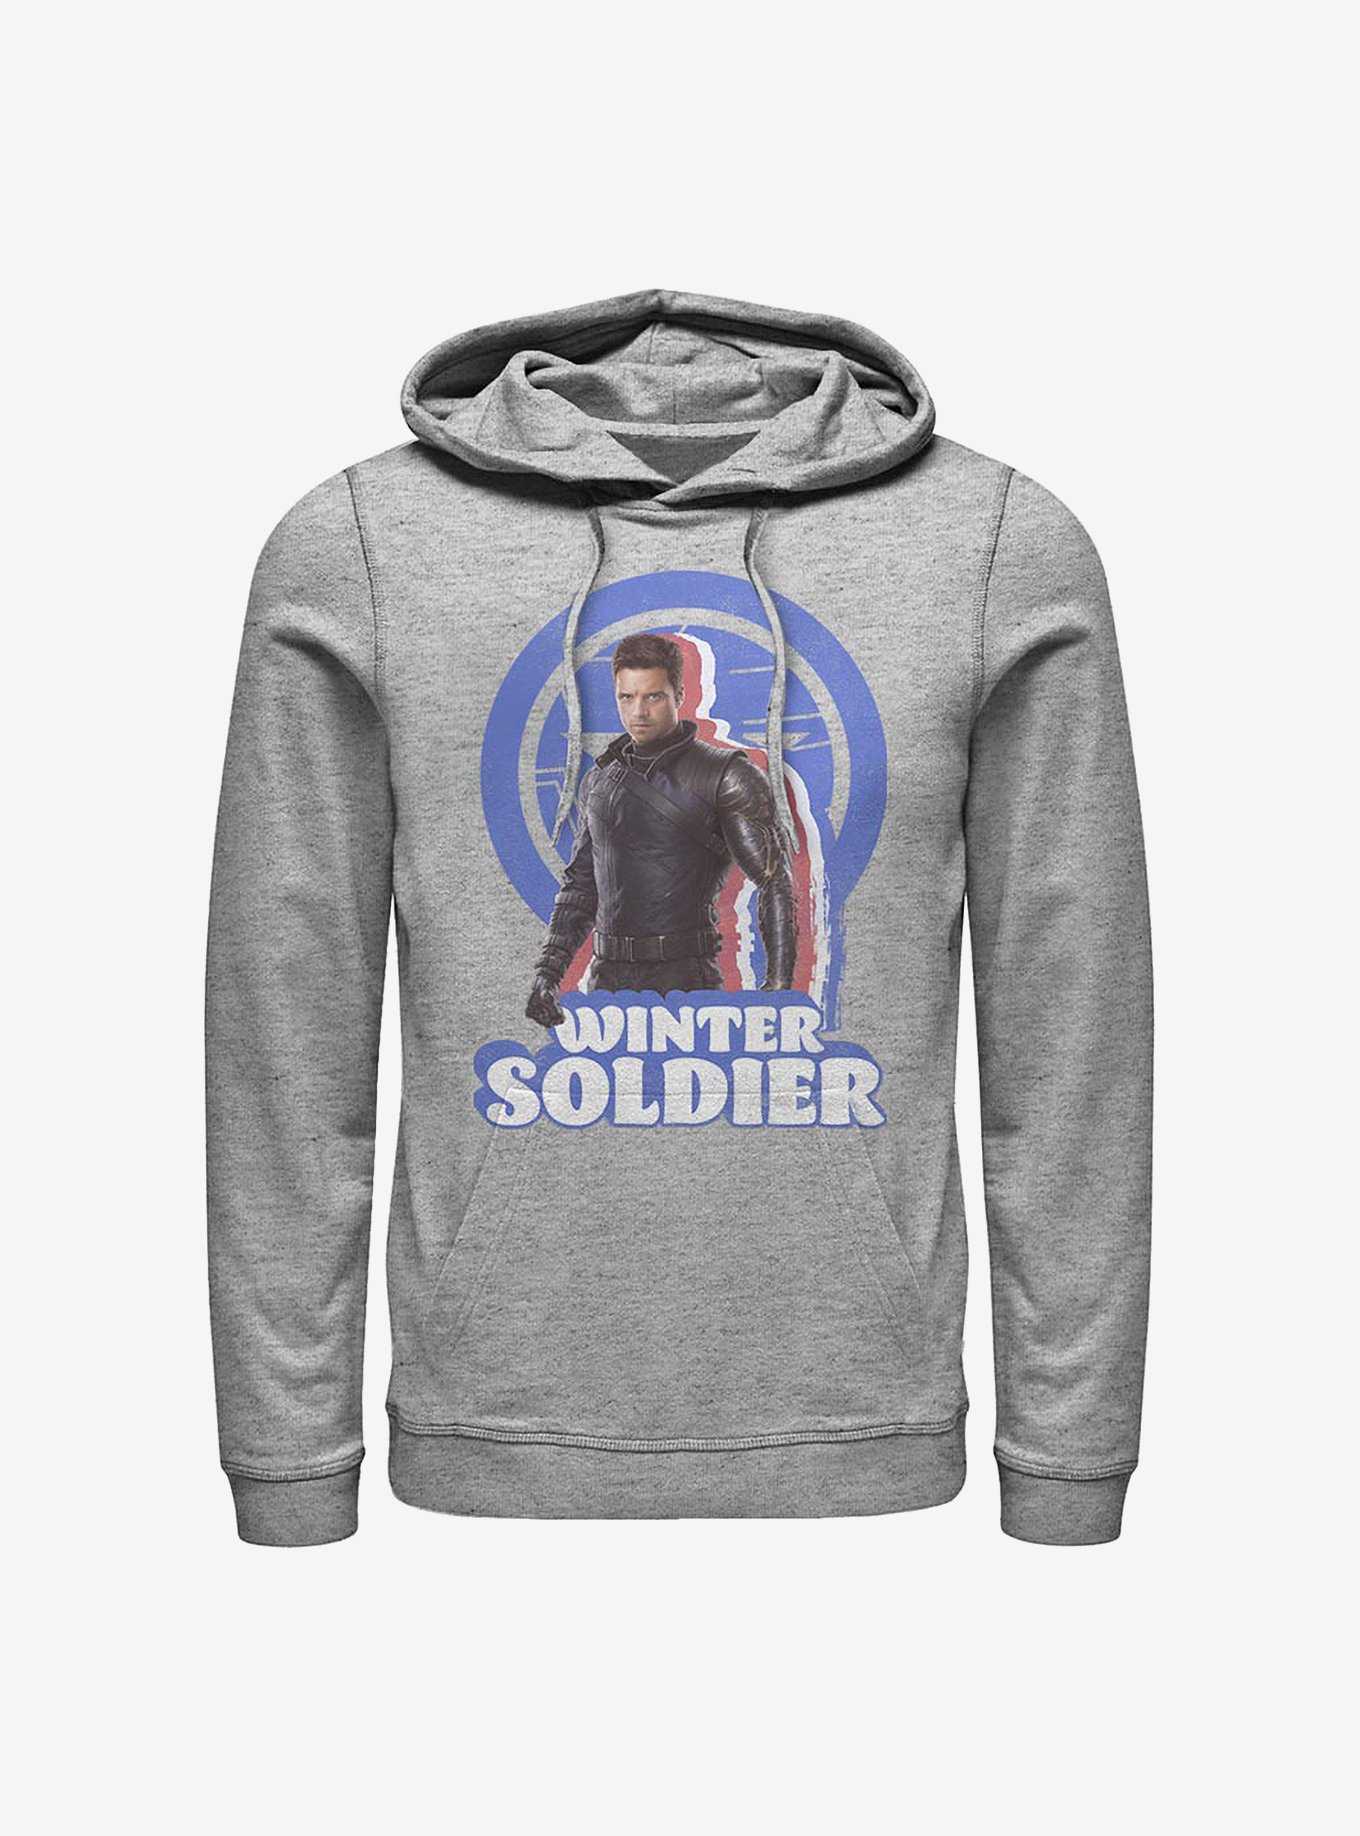 Marvel The Falcon And The Winter Soldier Bucky Pose Hoodie, , hi-res